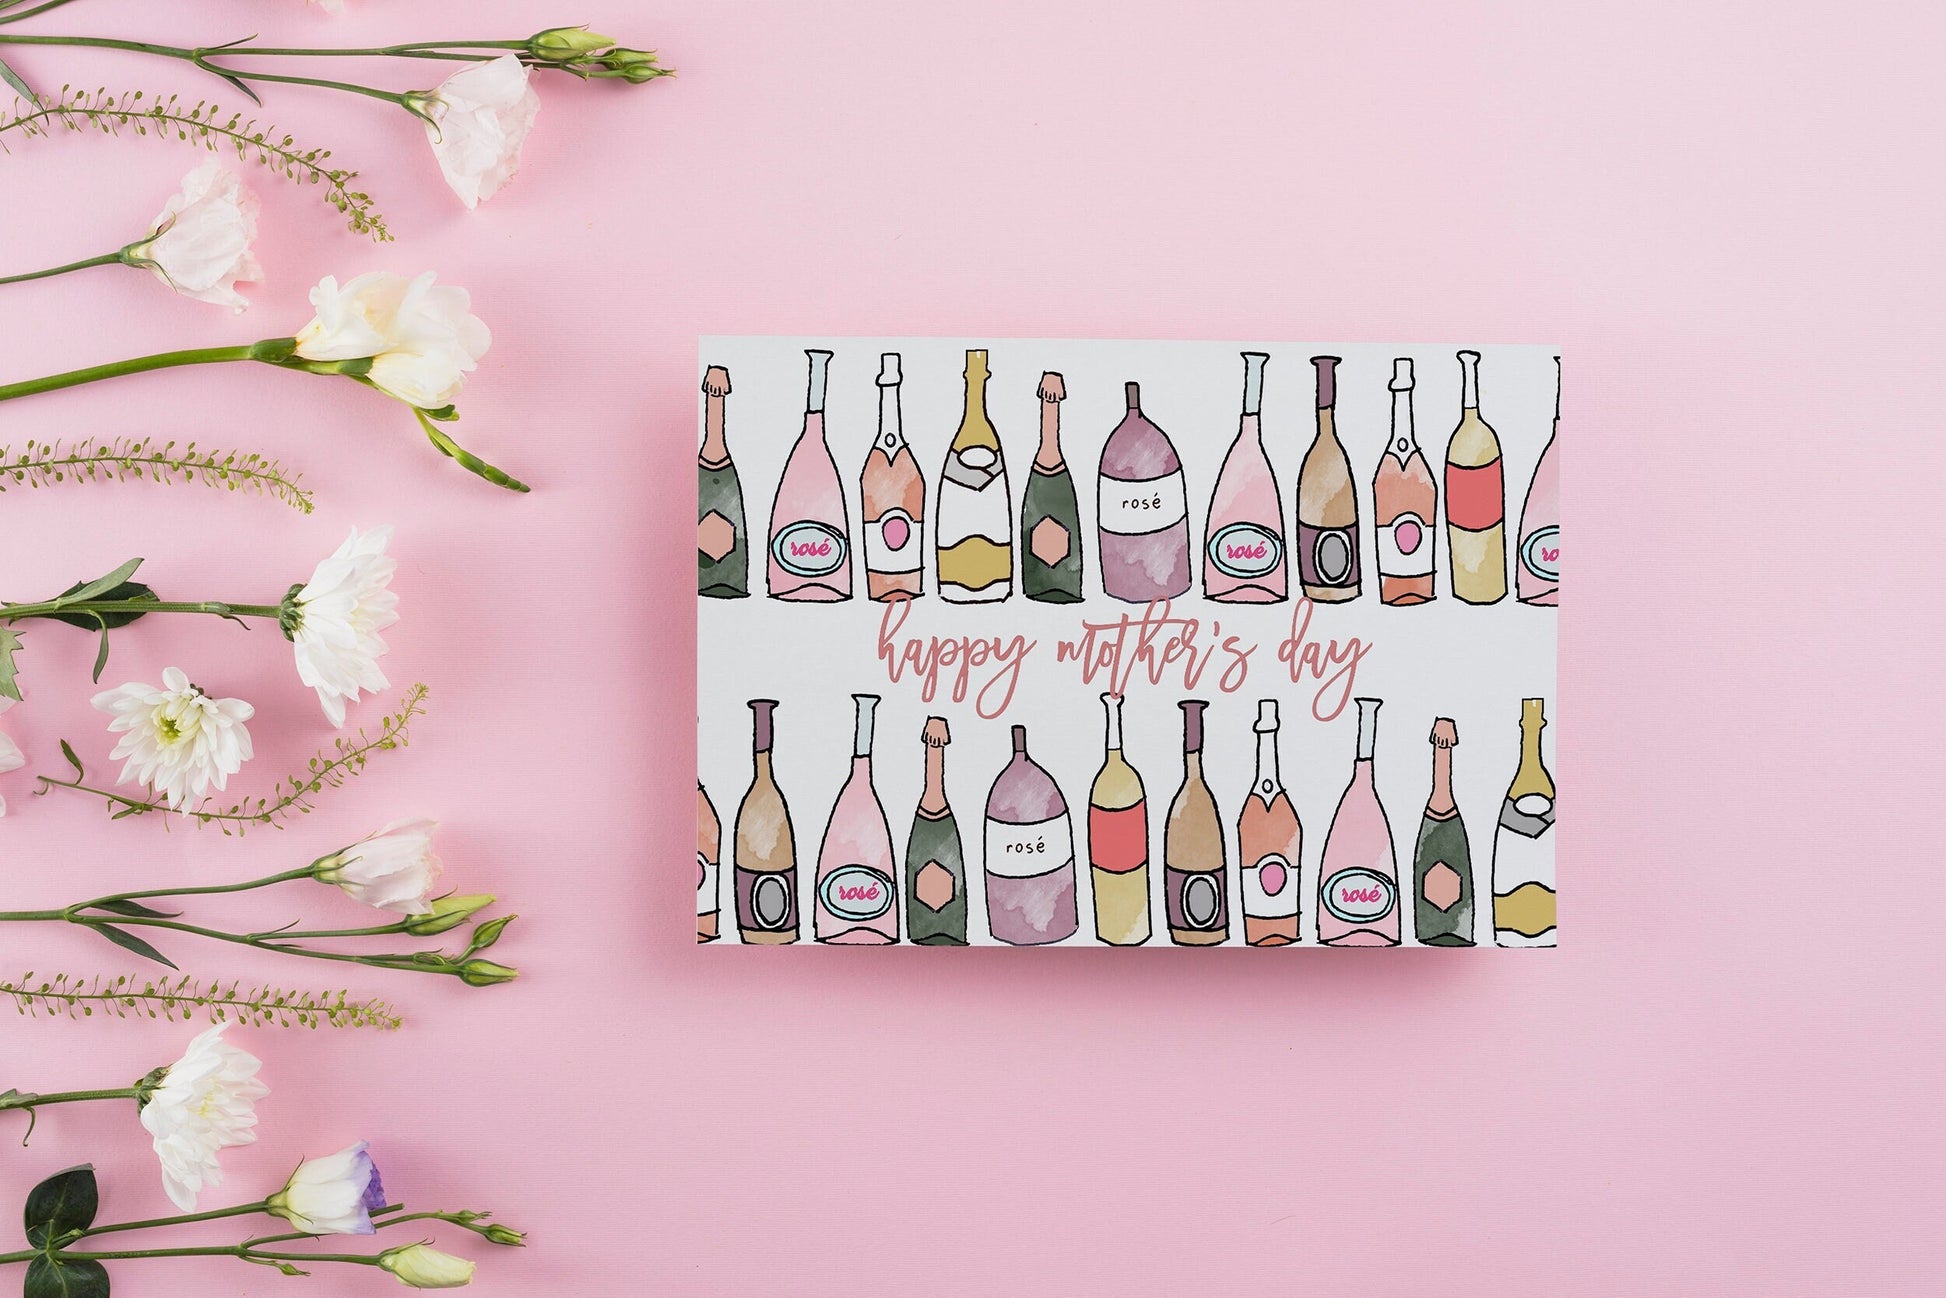 rosé all day mother's day card, cute gift for mom, wine lover gift, quirky unique mother's day cards, first mothers day, sister gift